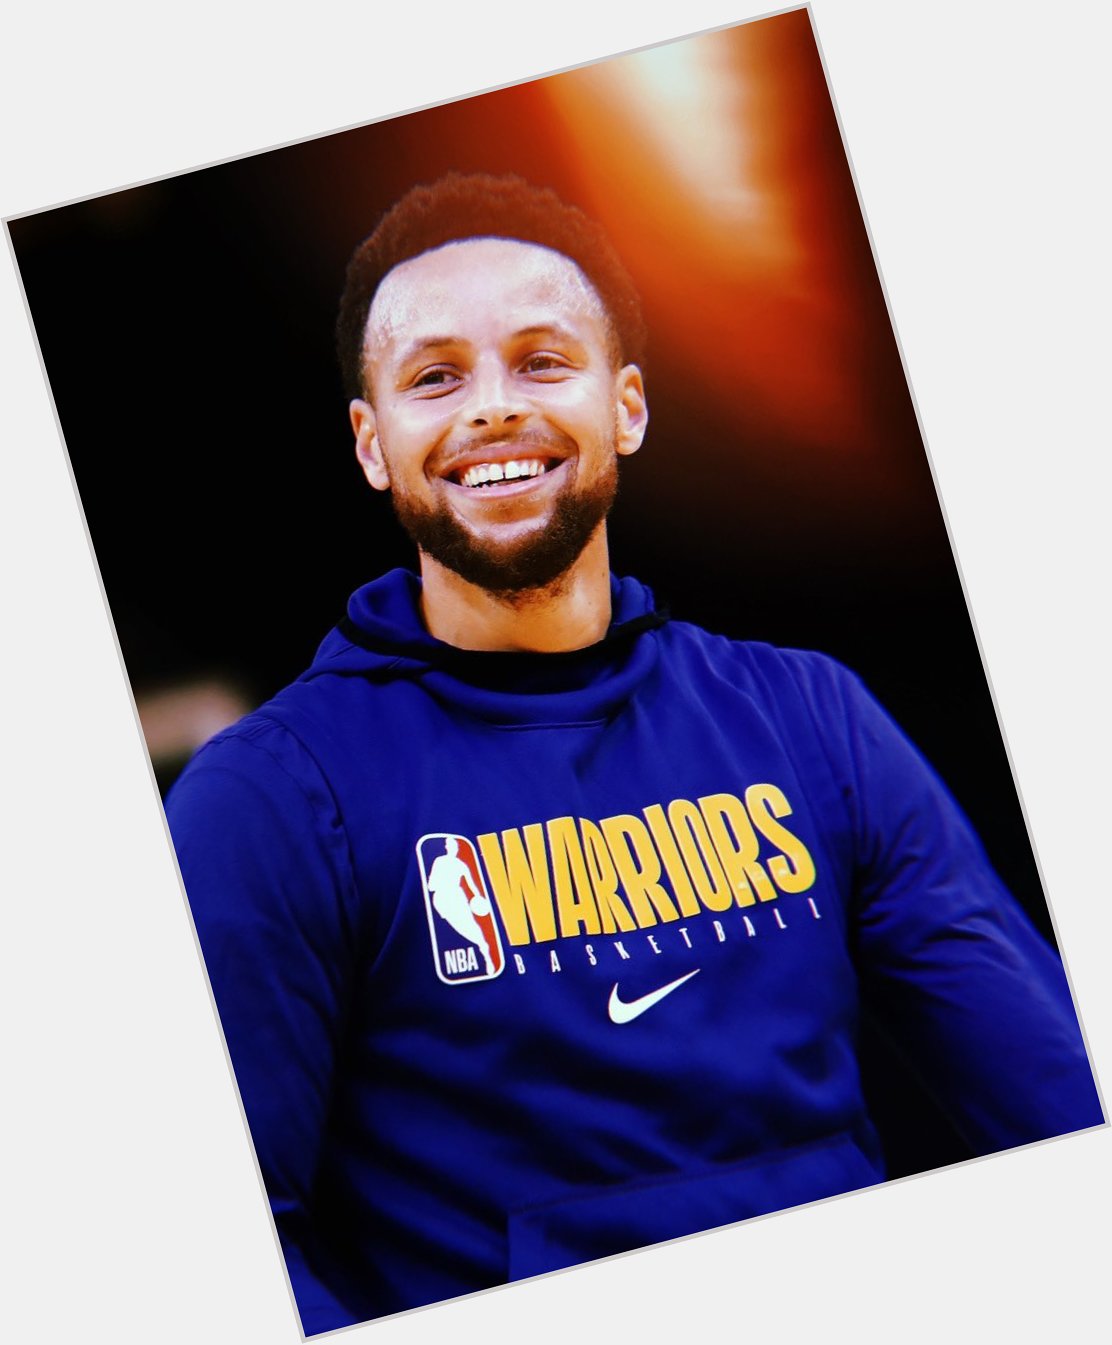 Happy 32nd birthday to Stephen Curry! 